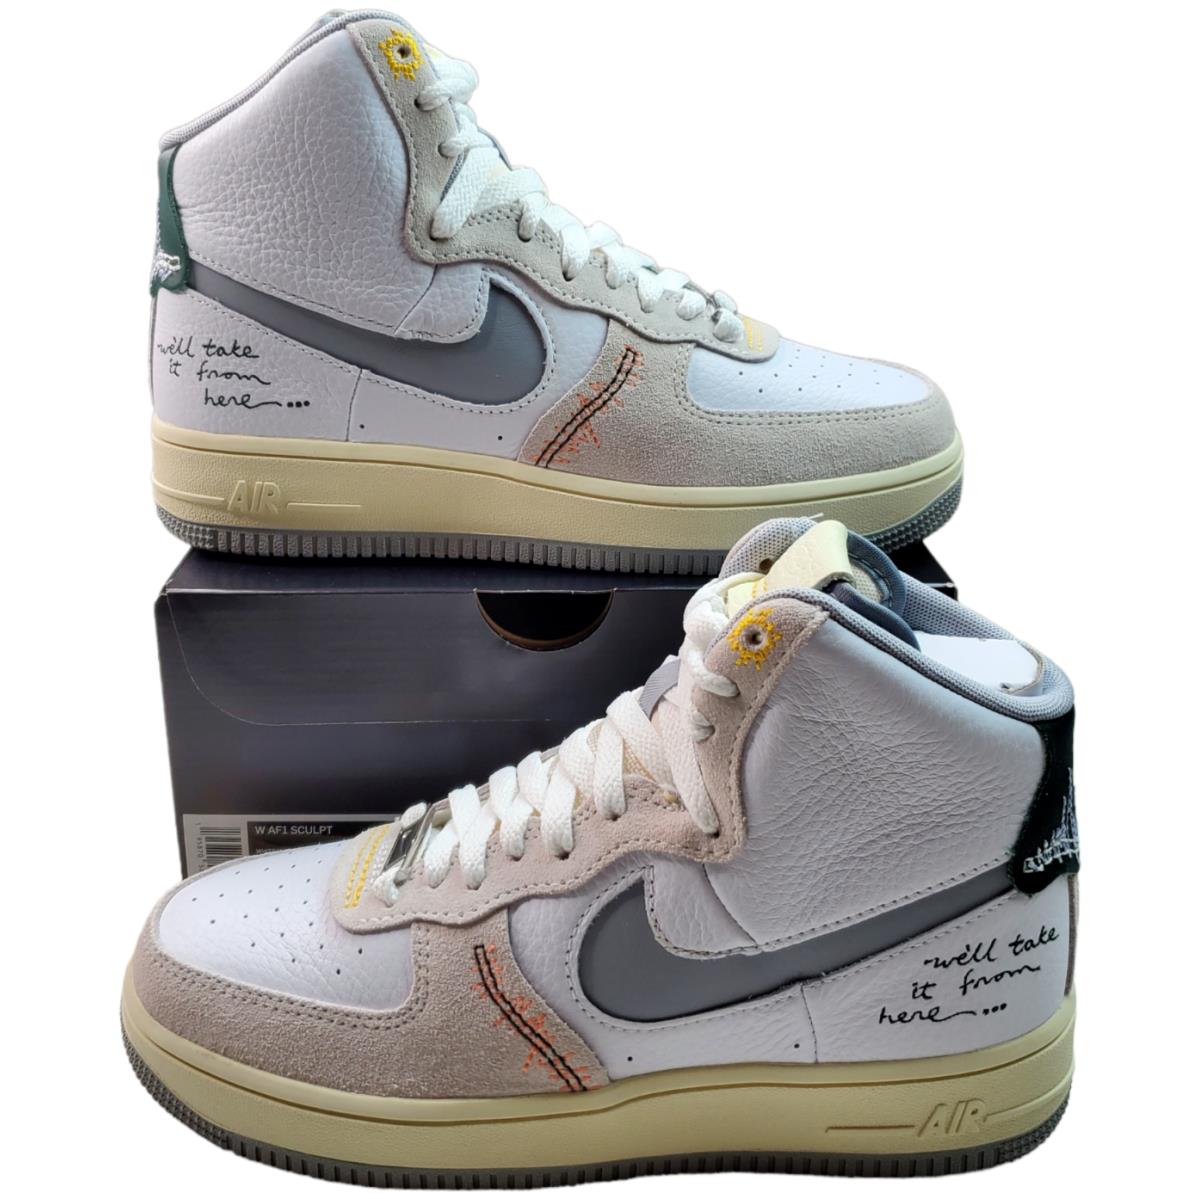 Nike Air Force One High Sculpt Shoes Wolf Grey Womens Size 6.5